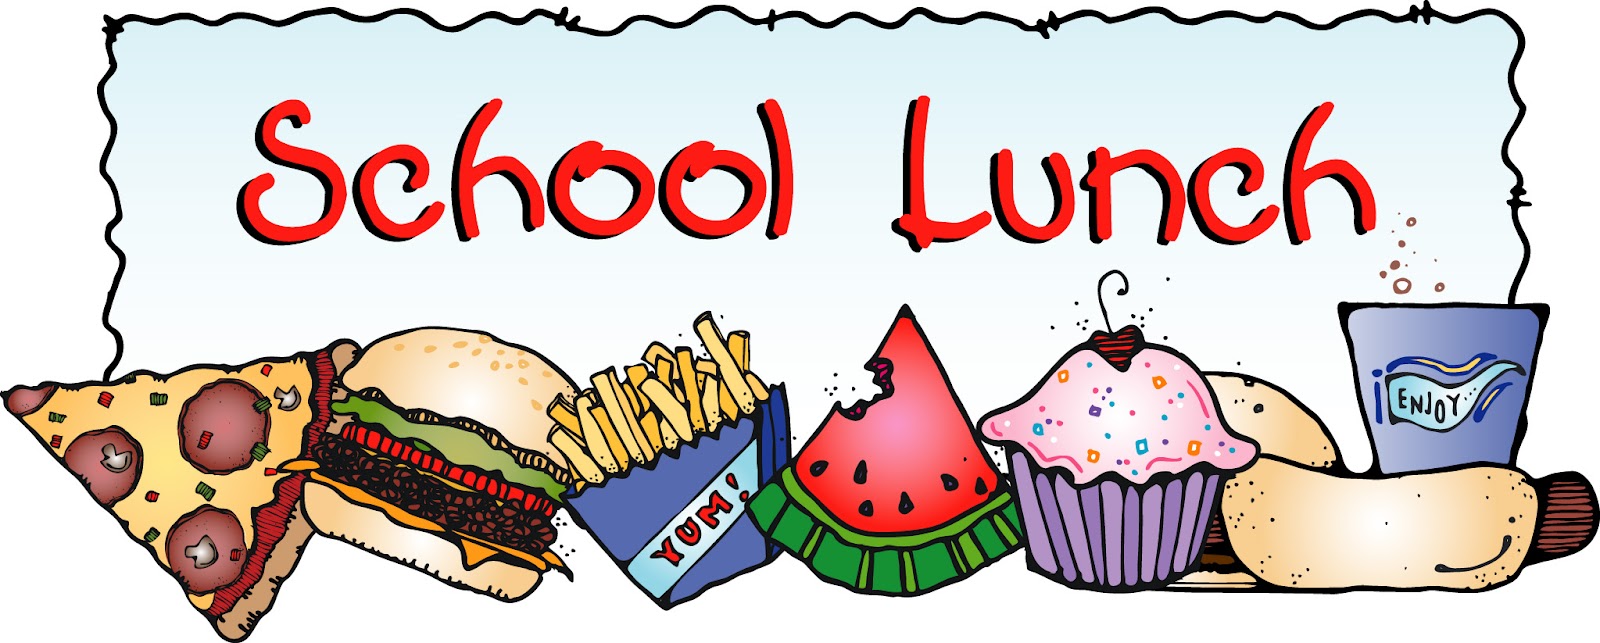 New School Lunch Page At The Top Of This Blog You Can Access The Lunch